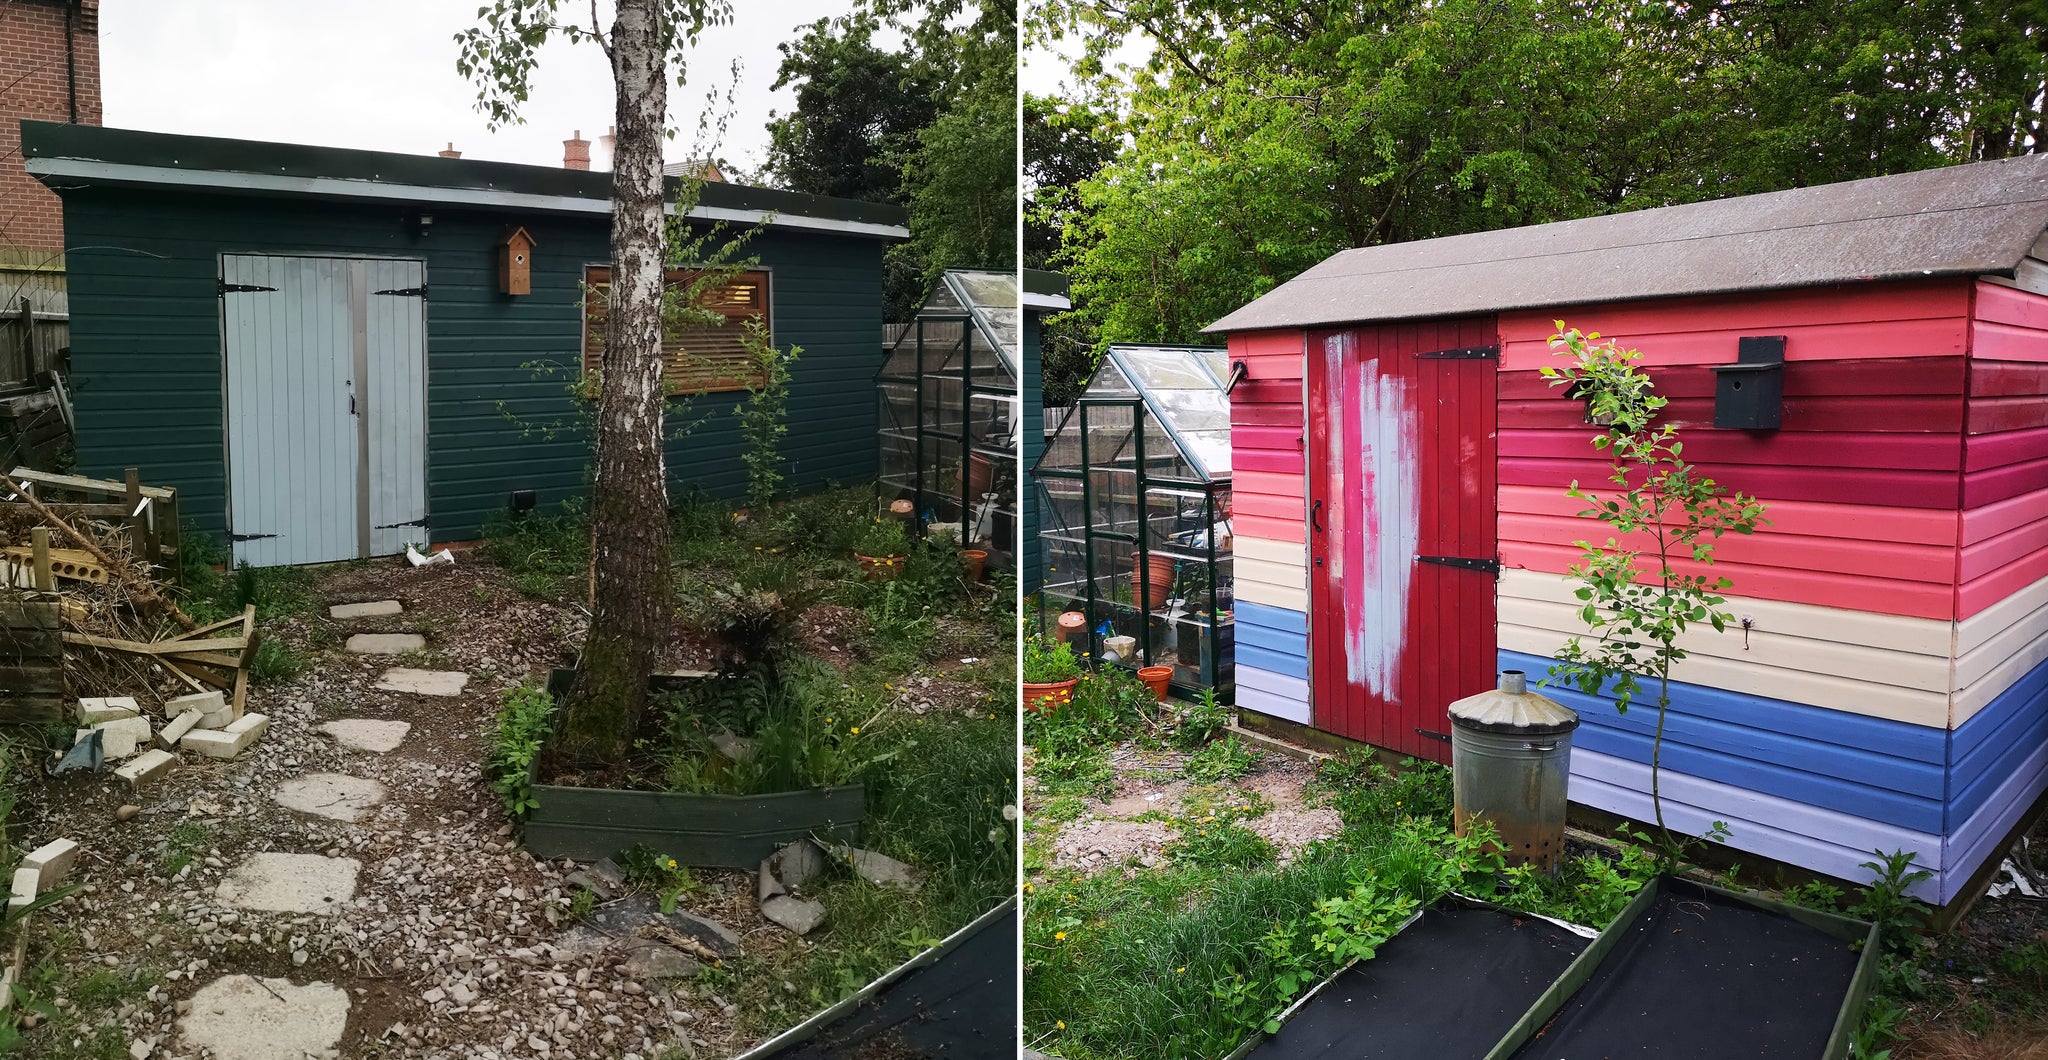 photos of the garden space outside of runaway workshop, a brightly painted shed in shades of pink and blue, and a half built stone pathway to a large green out building with lots of trees and greenery surrounding it